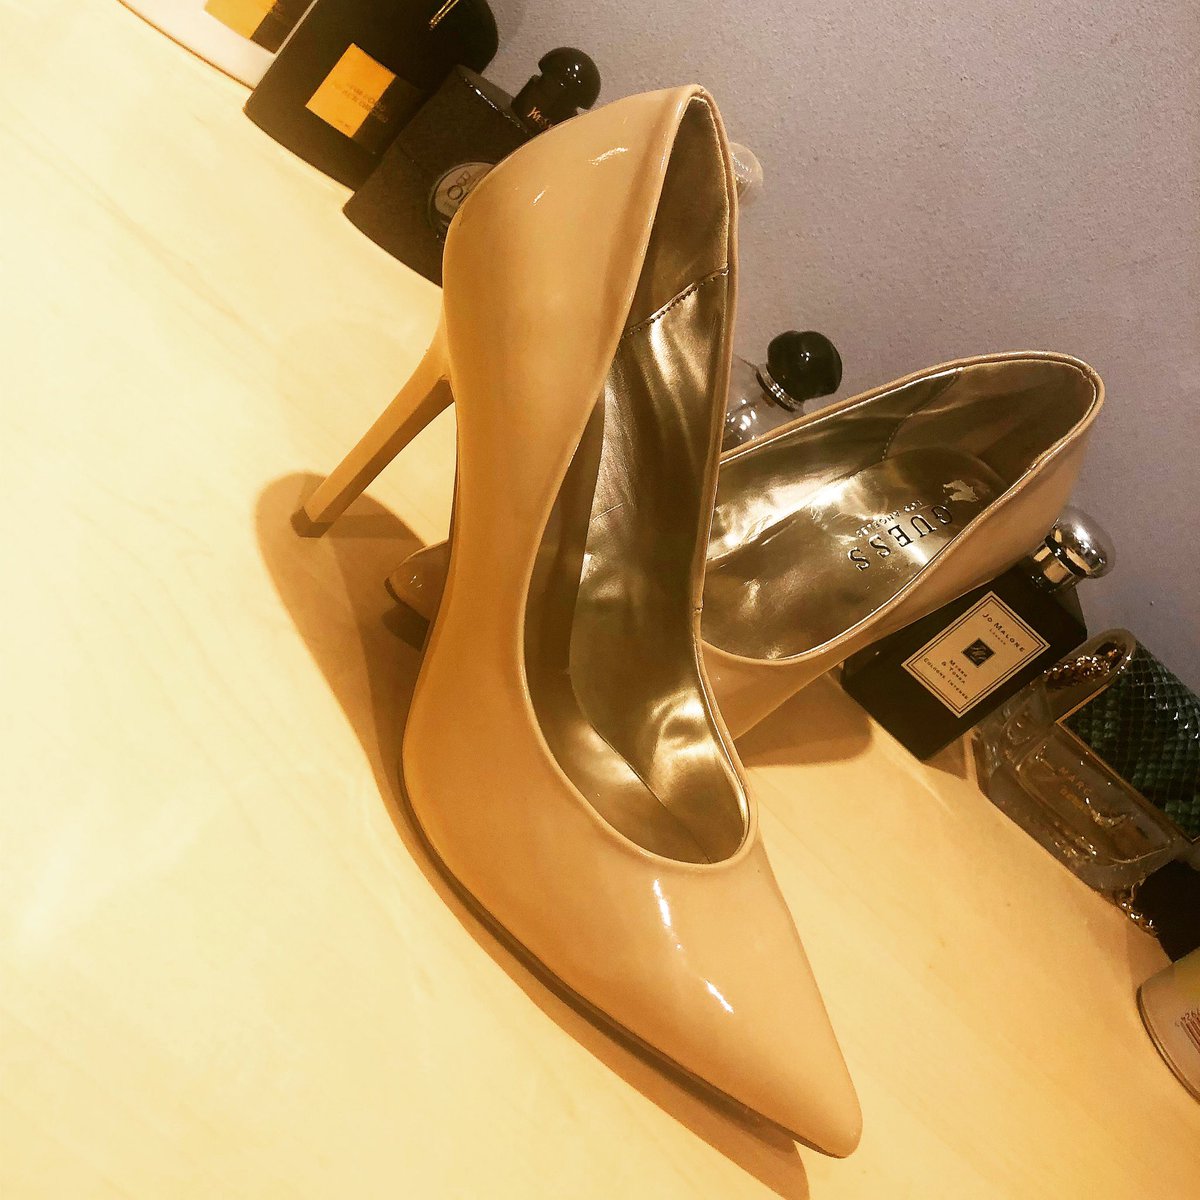 Just Couldn’t resist these Beauties falling into my shopping bag today.... Early Xmas 👠Present #Guess #Nude #guessshoes #StilettoGirl #PowerShoe